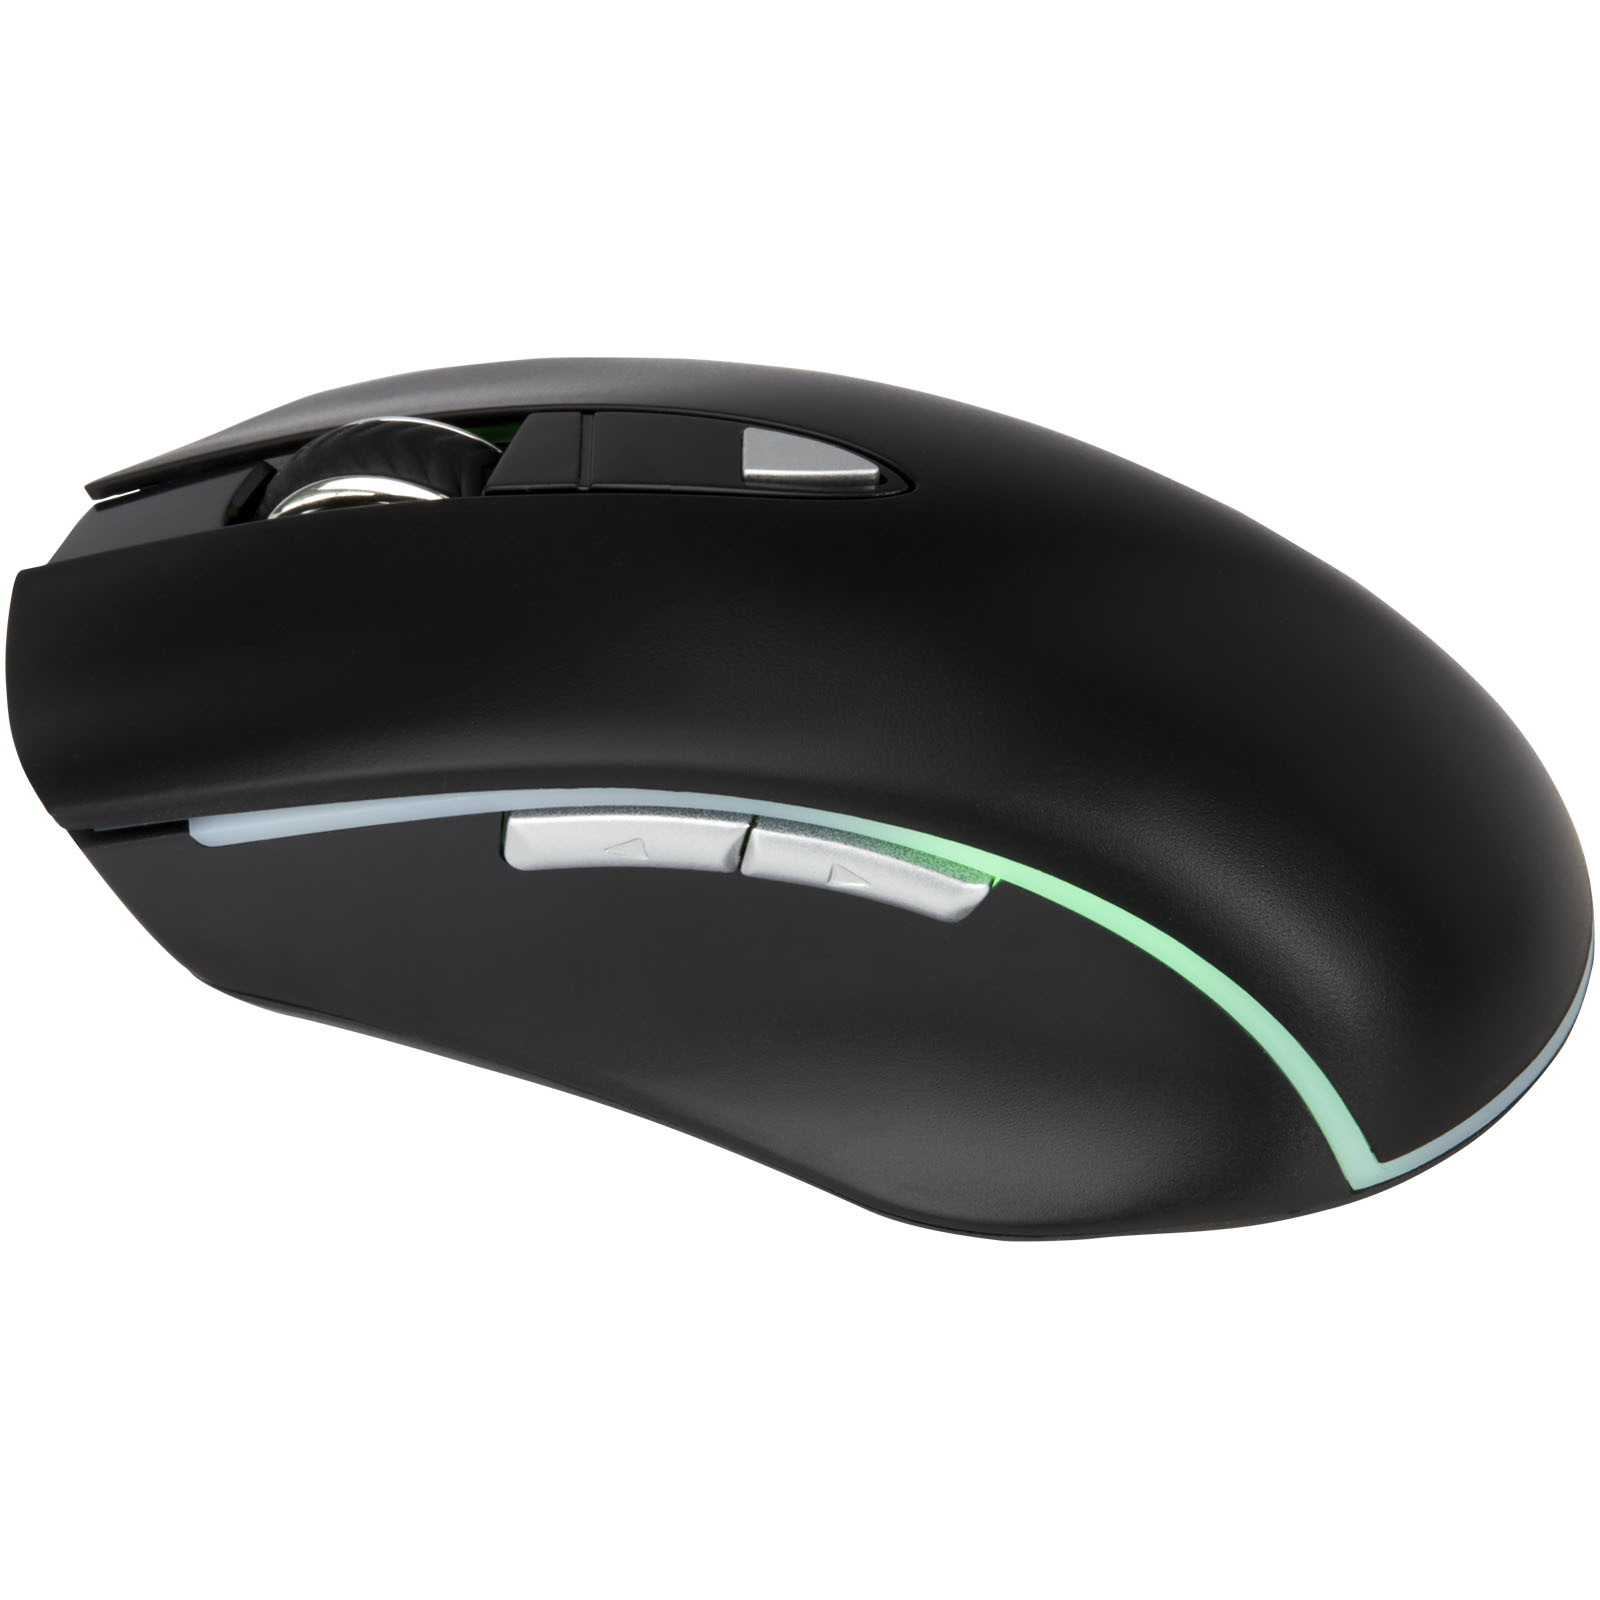 Advertising Computer Accessories - Gleam light-up mouse